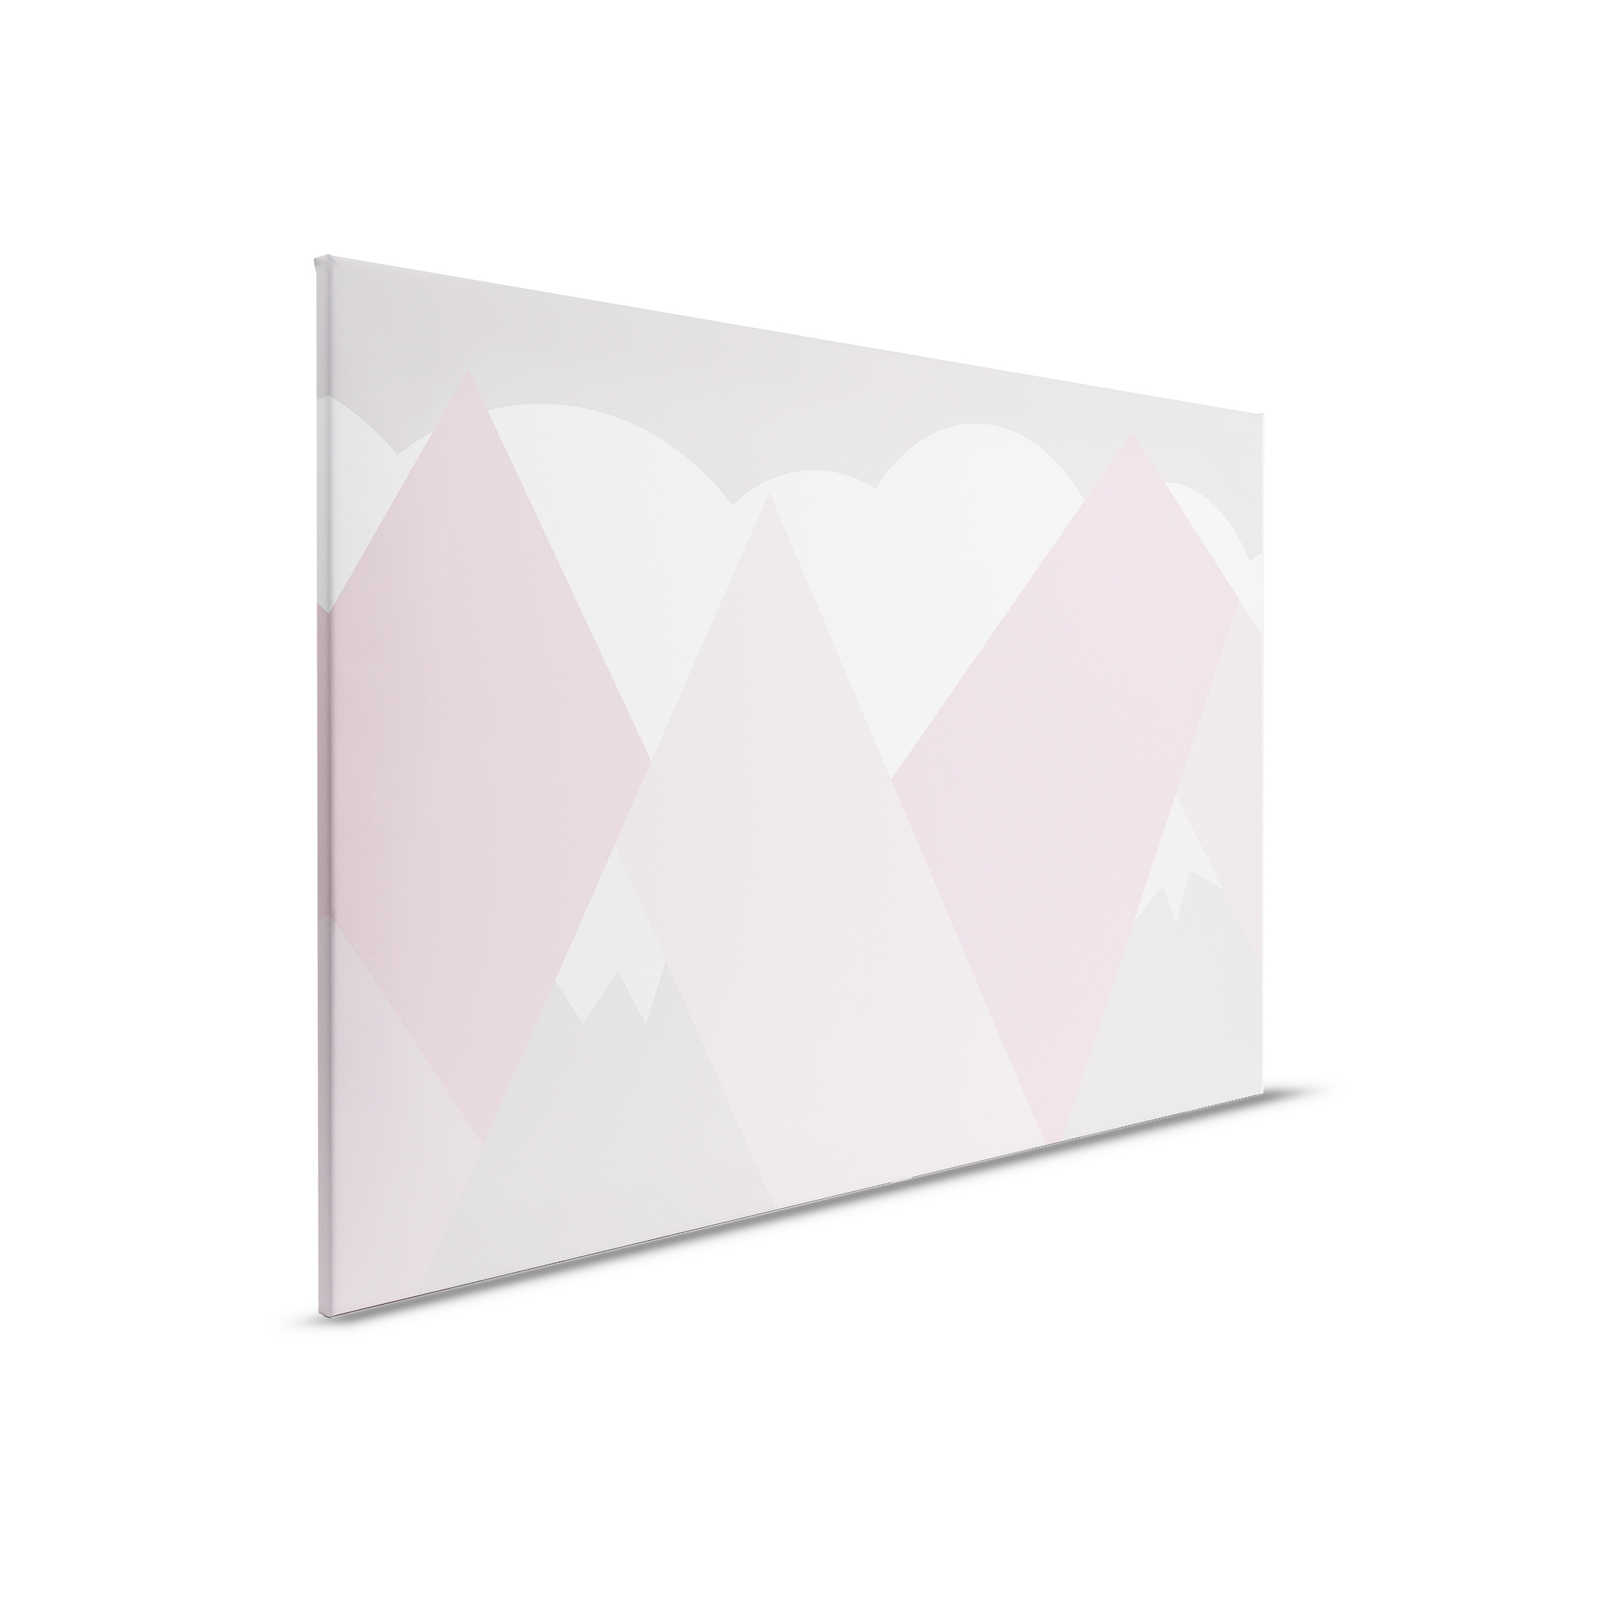         Canvas painting Nursery Mountains with clouds | pink, white, grey - 0,90 m x 0,60 m
    